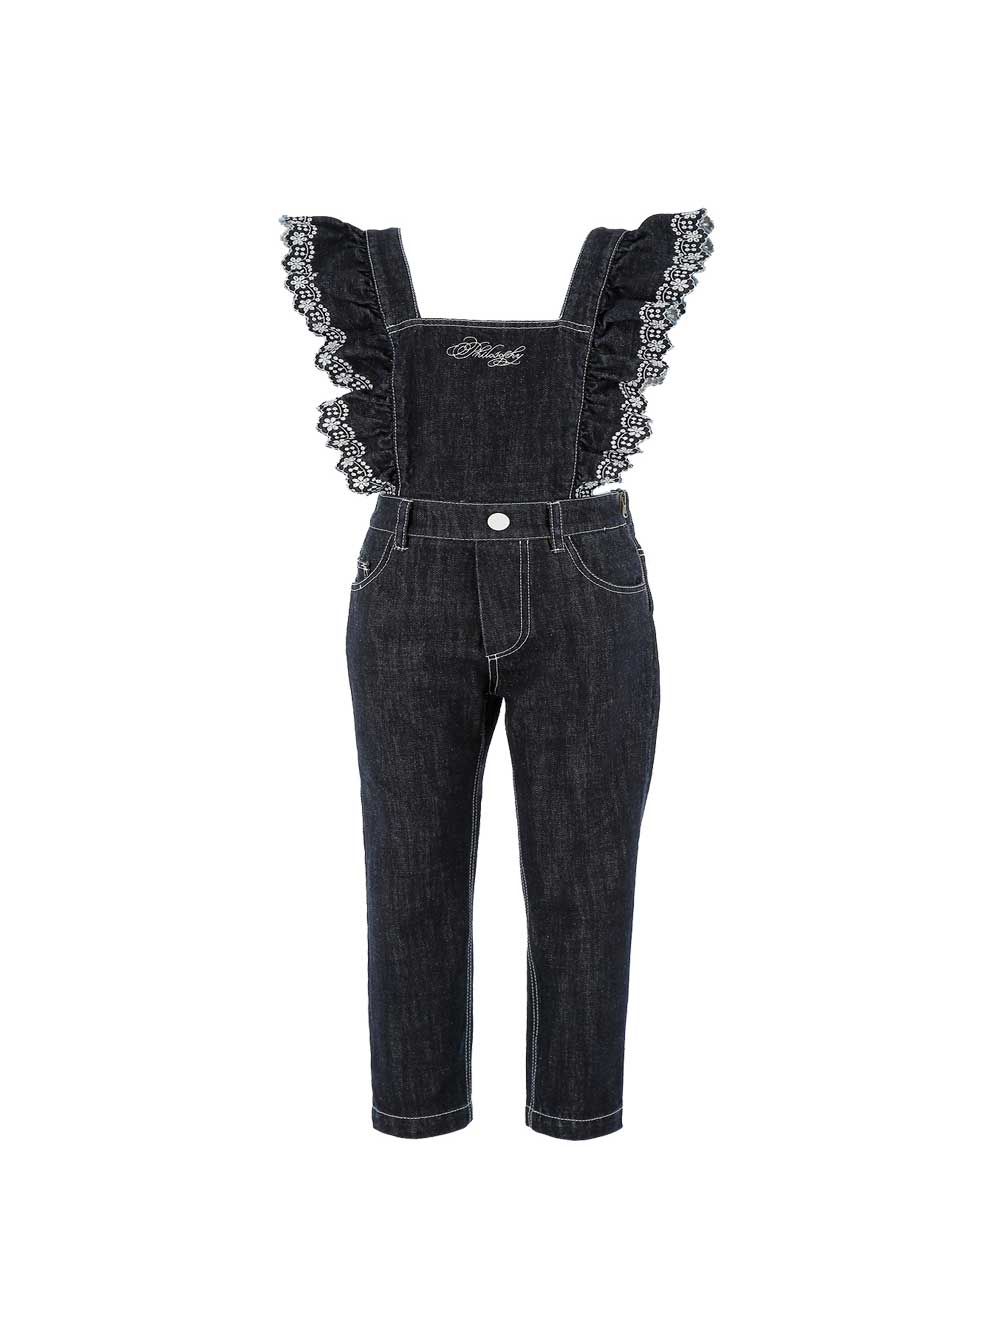 Embroidered Ruffled Overalls